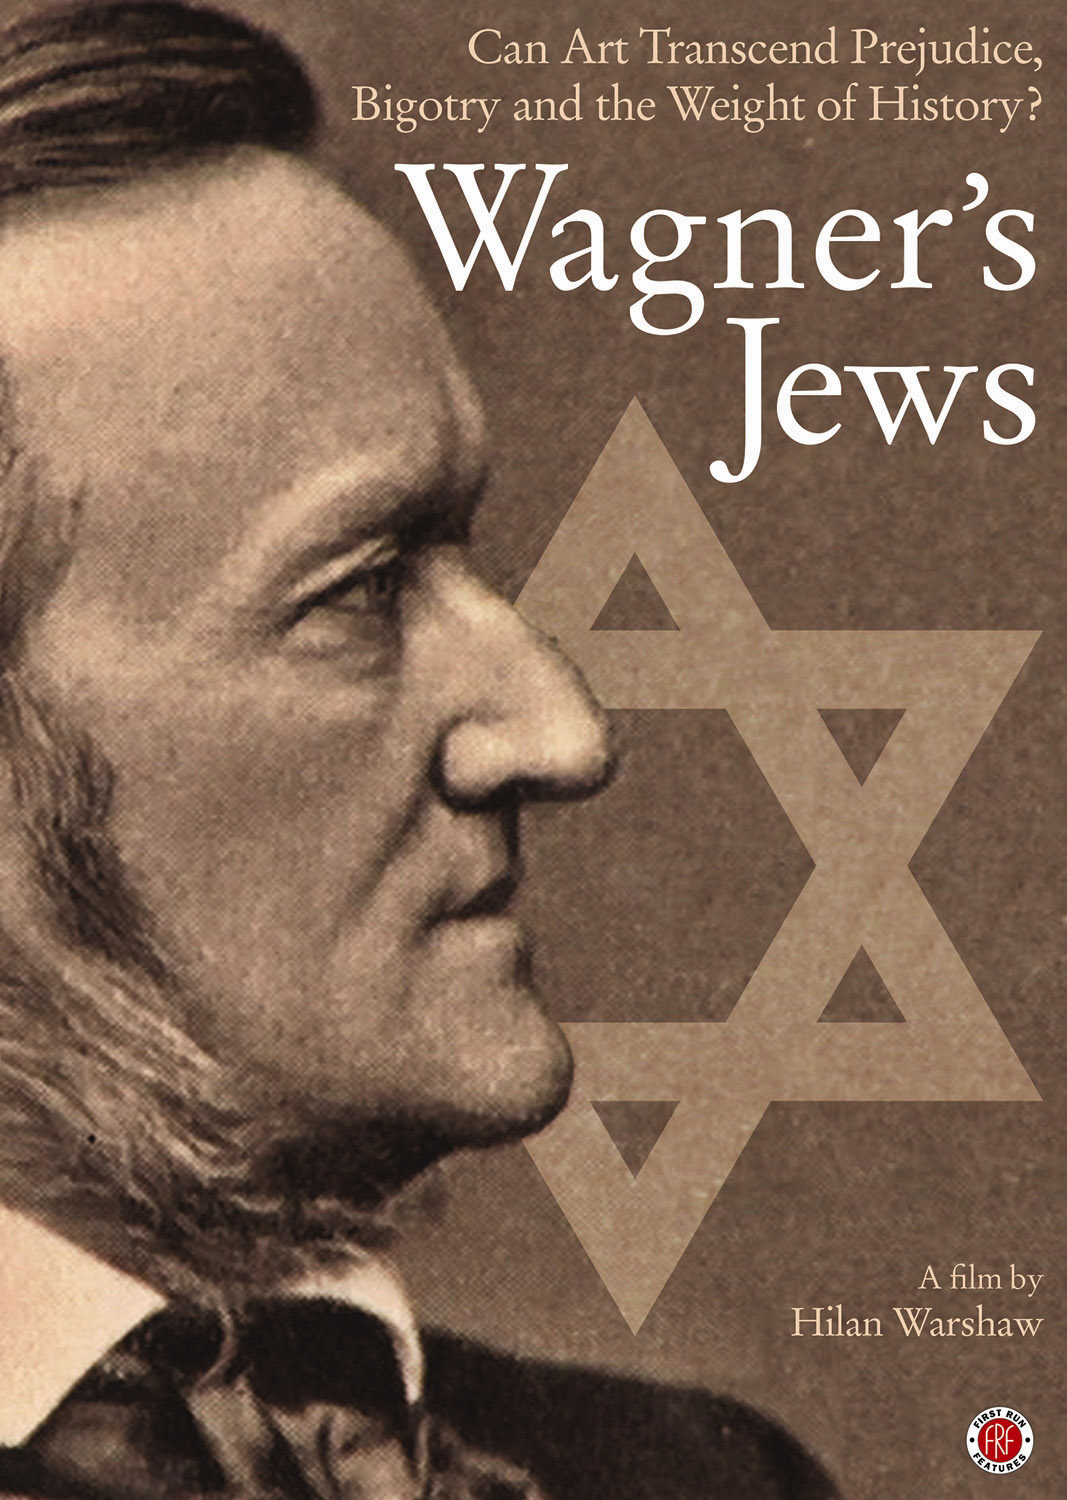 Wagner's Jews Poster